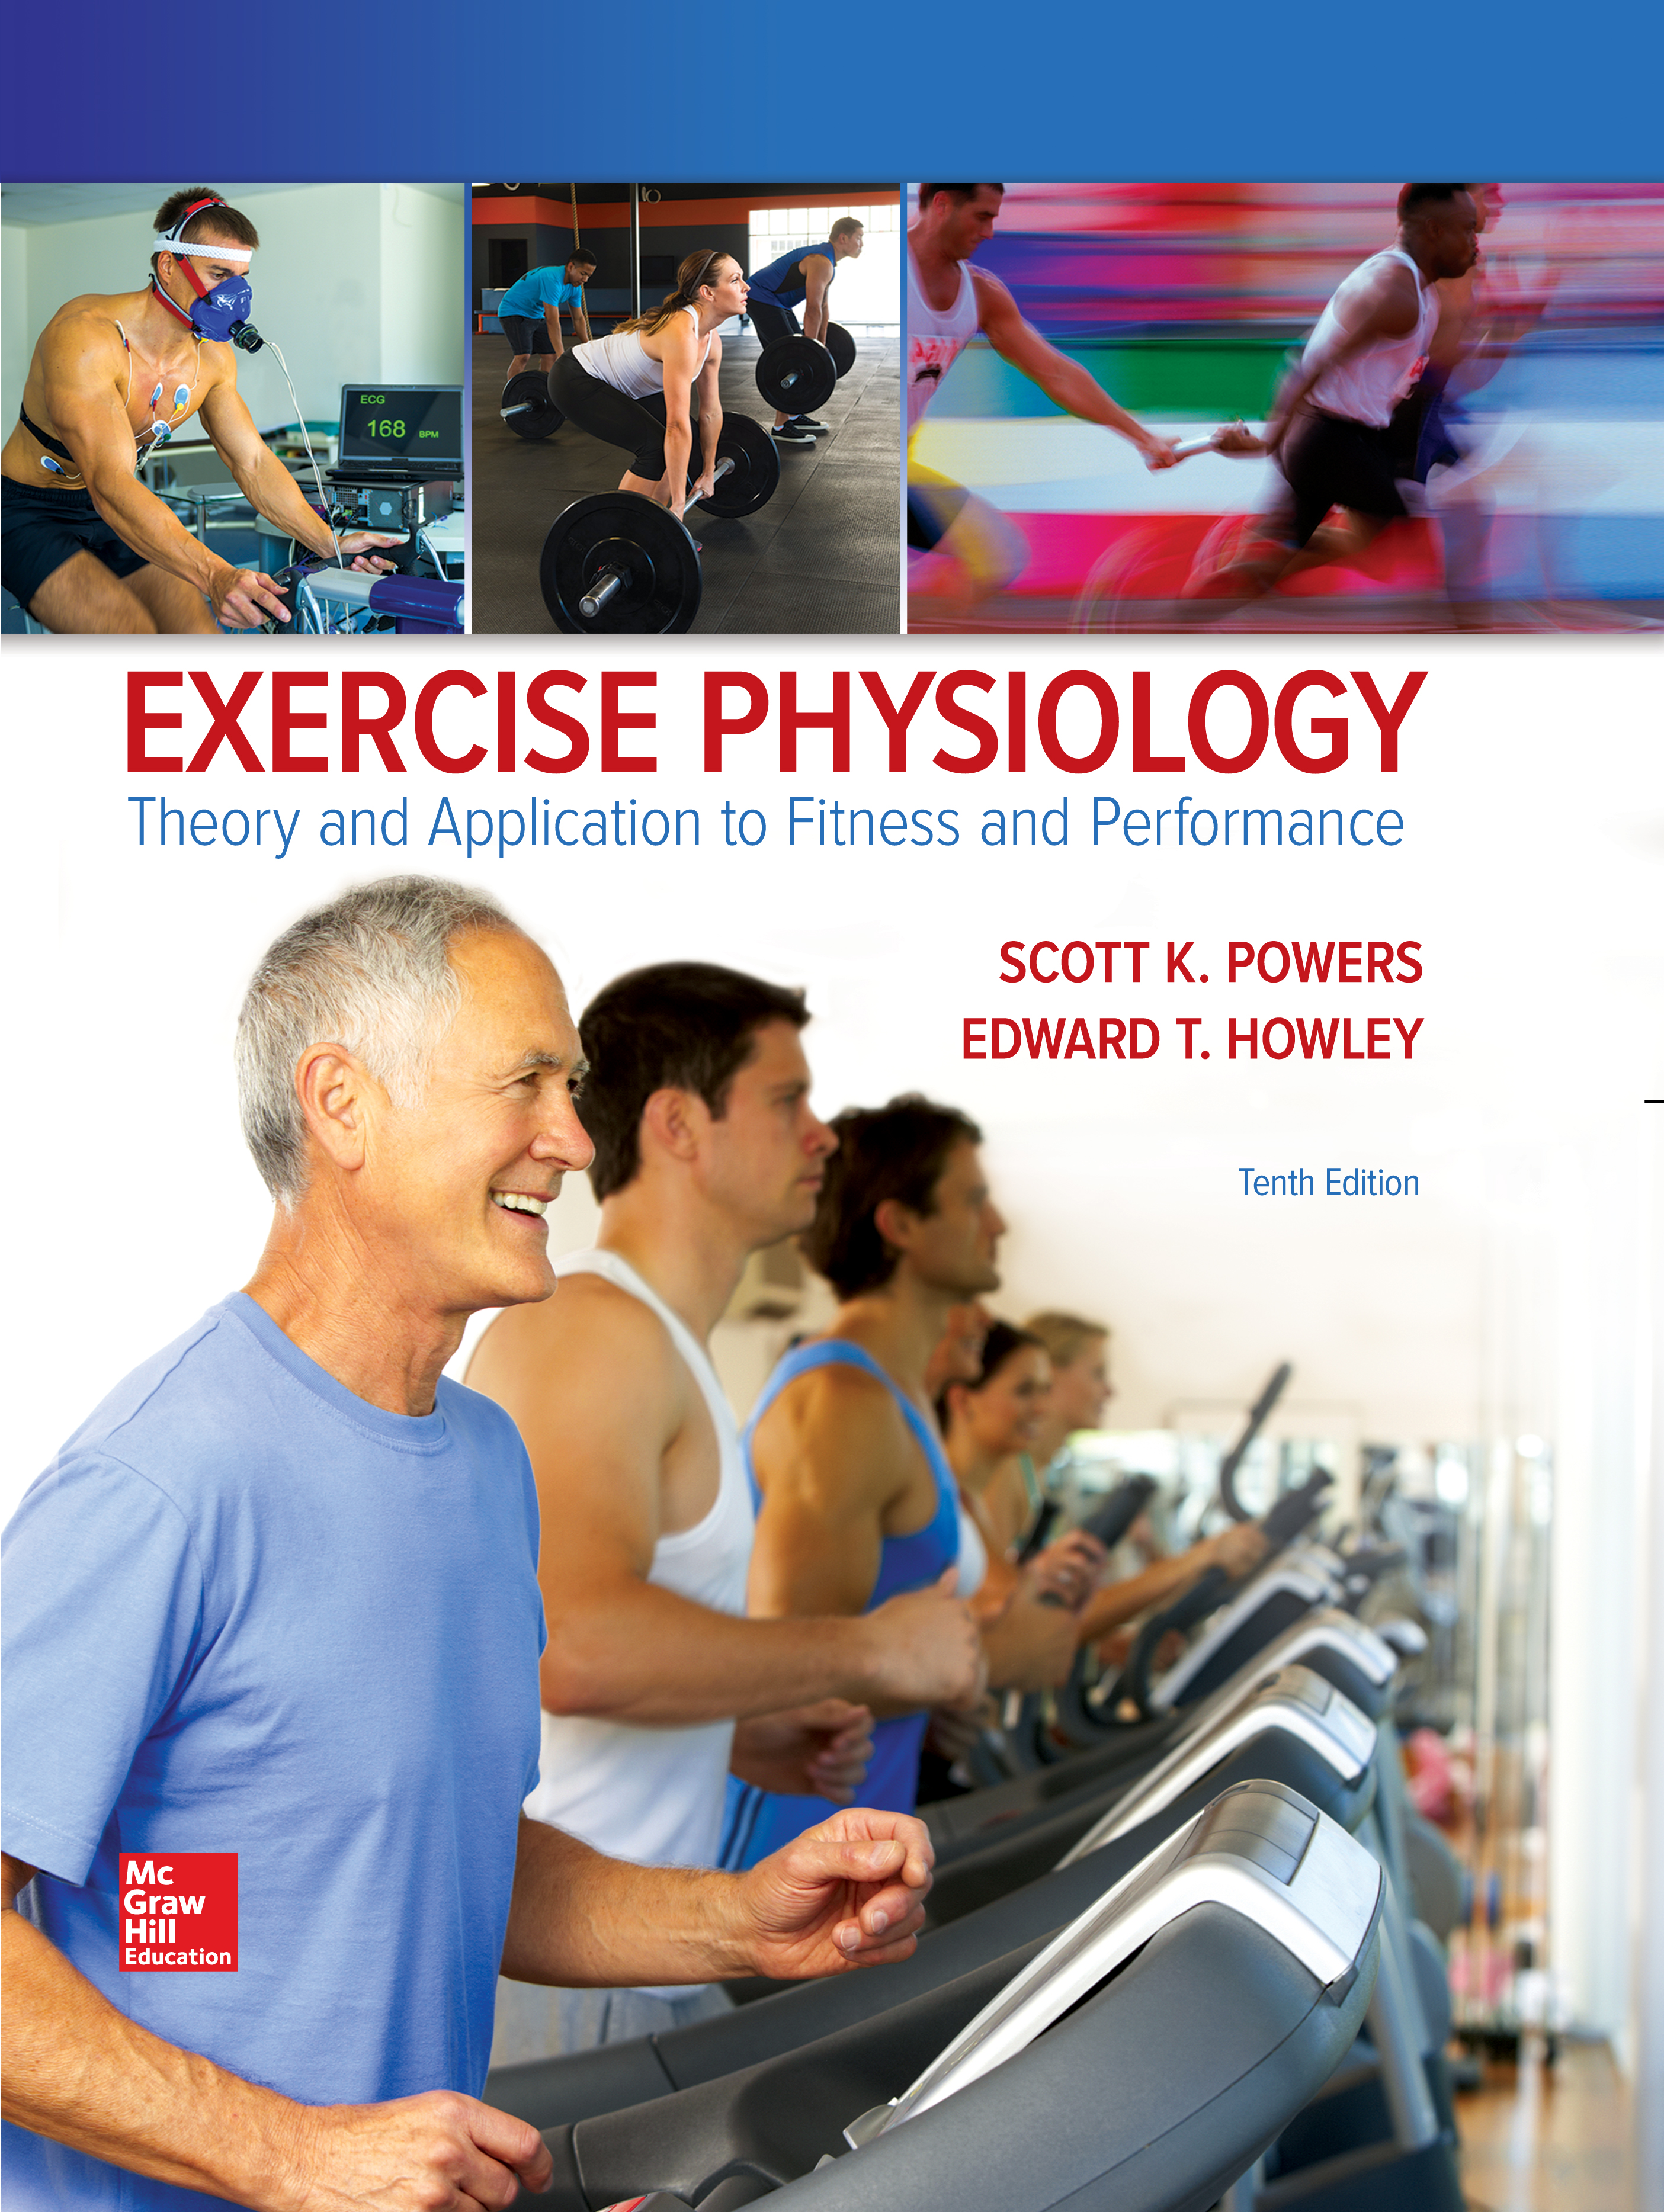 Exercise physiology powers and howley pdf